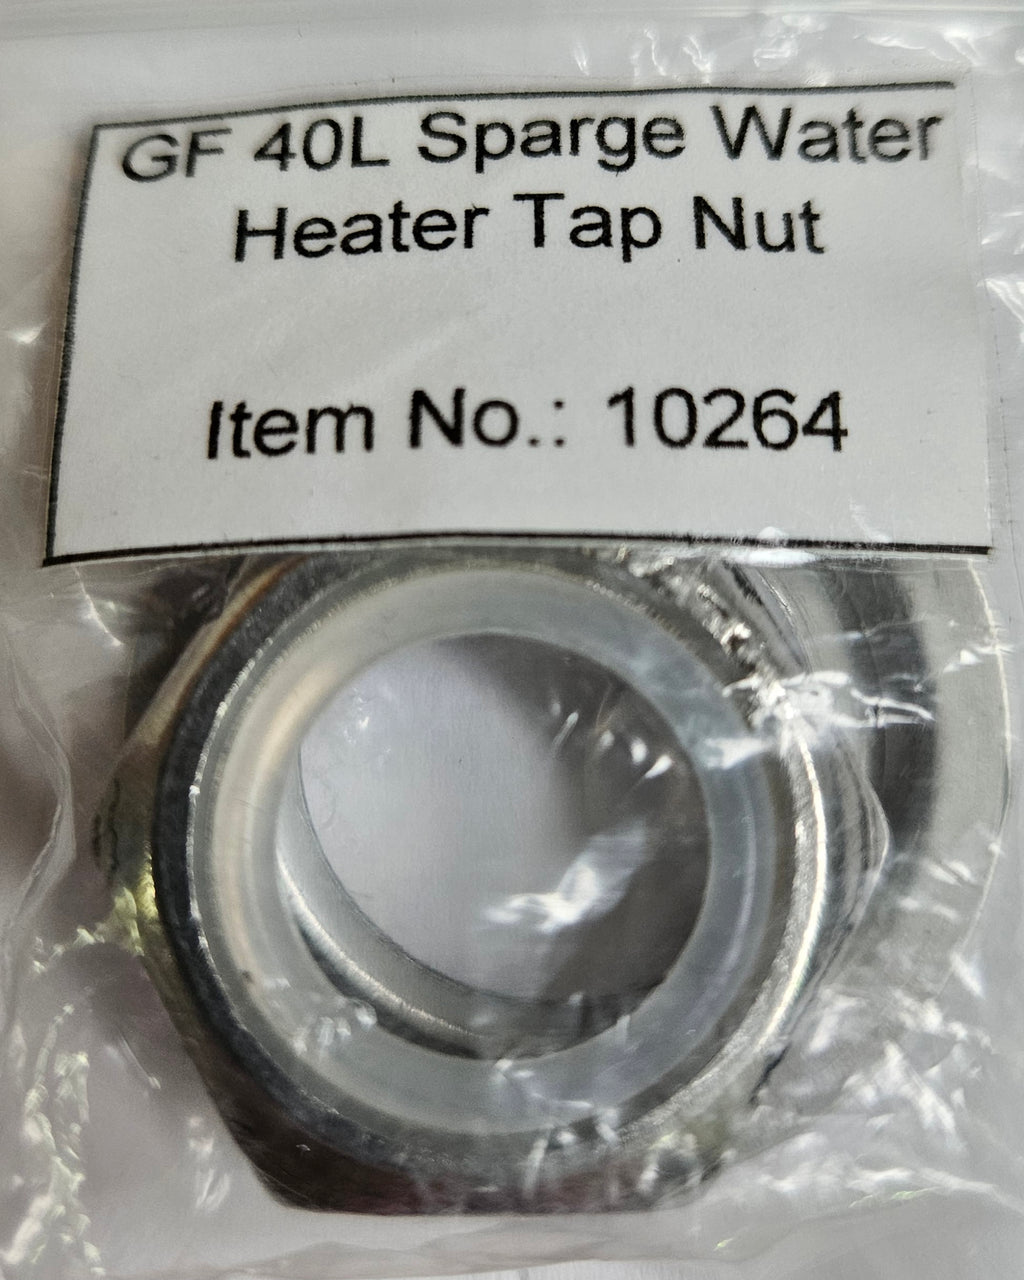 Tap Nut for 40L Sparge Water Heater Ball Valve Tap (10264)